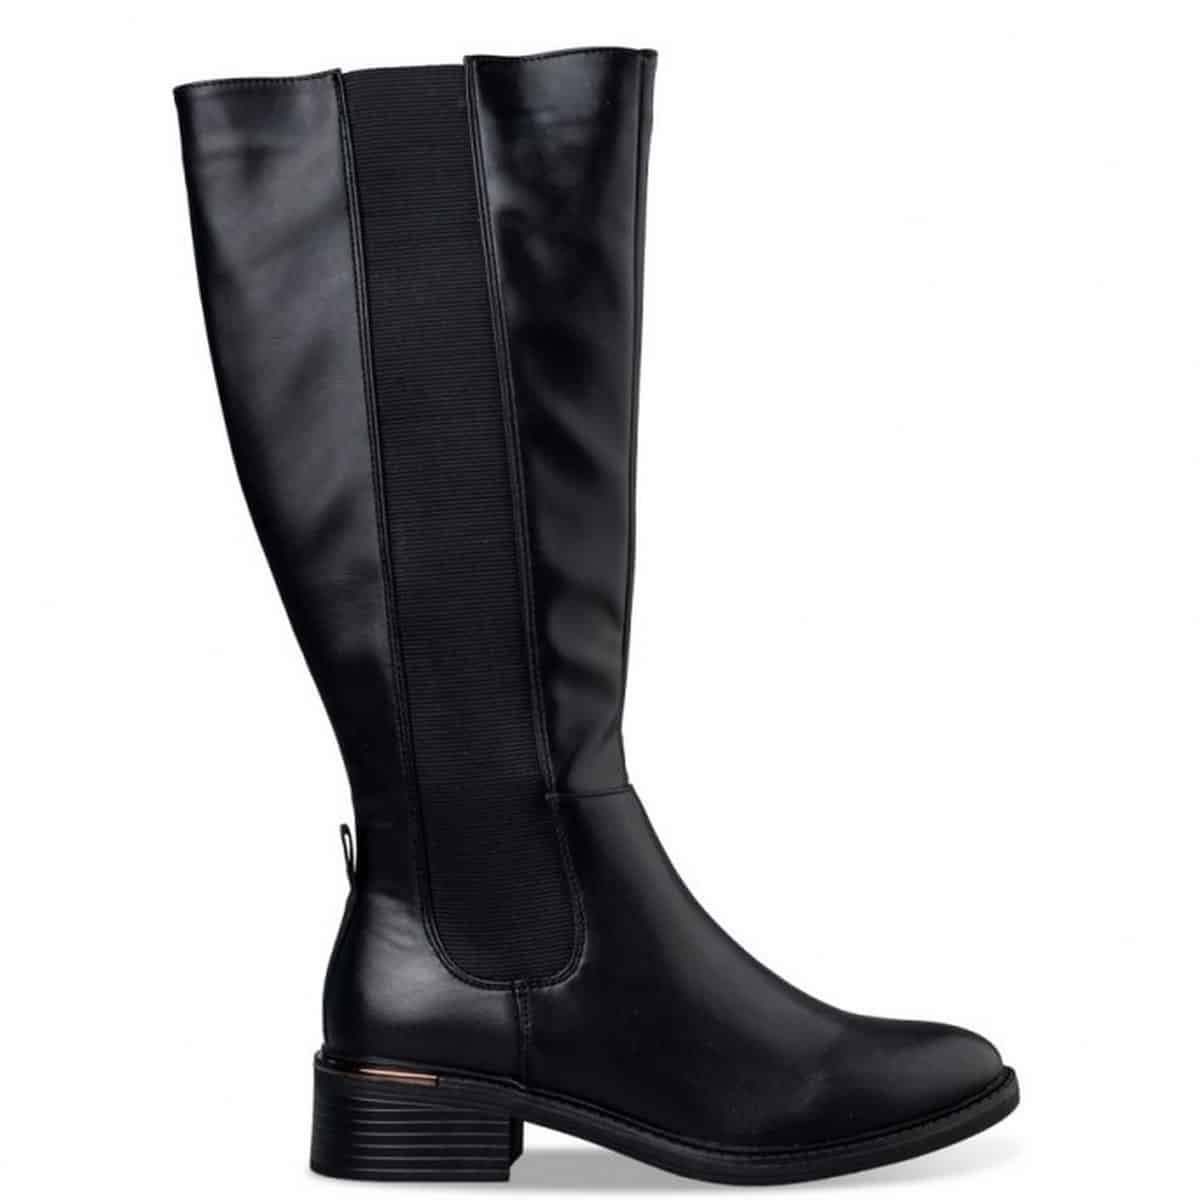 ECO LEATHER RIDING KNEE-HIGH BOOTS V57-18386-34 ENVIE SHOES BLACK